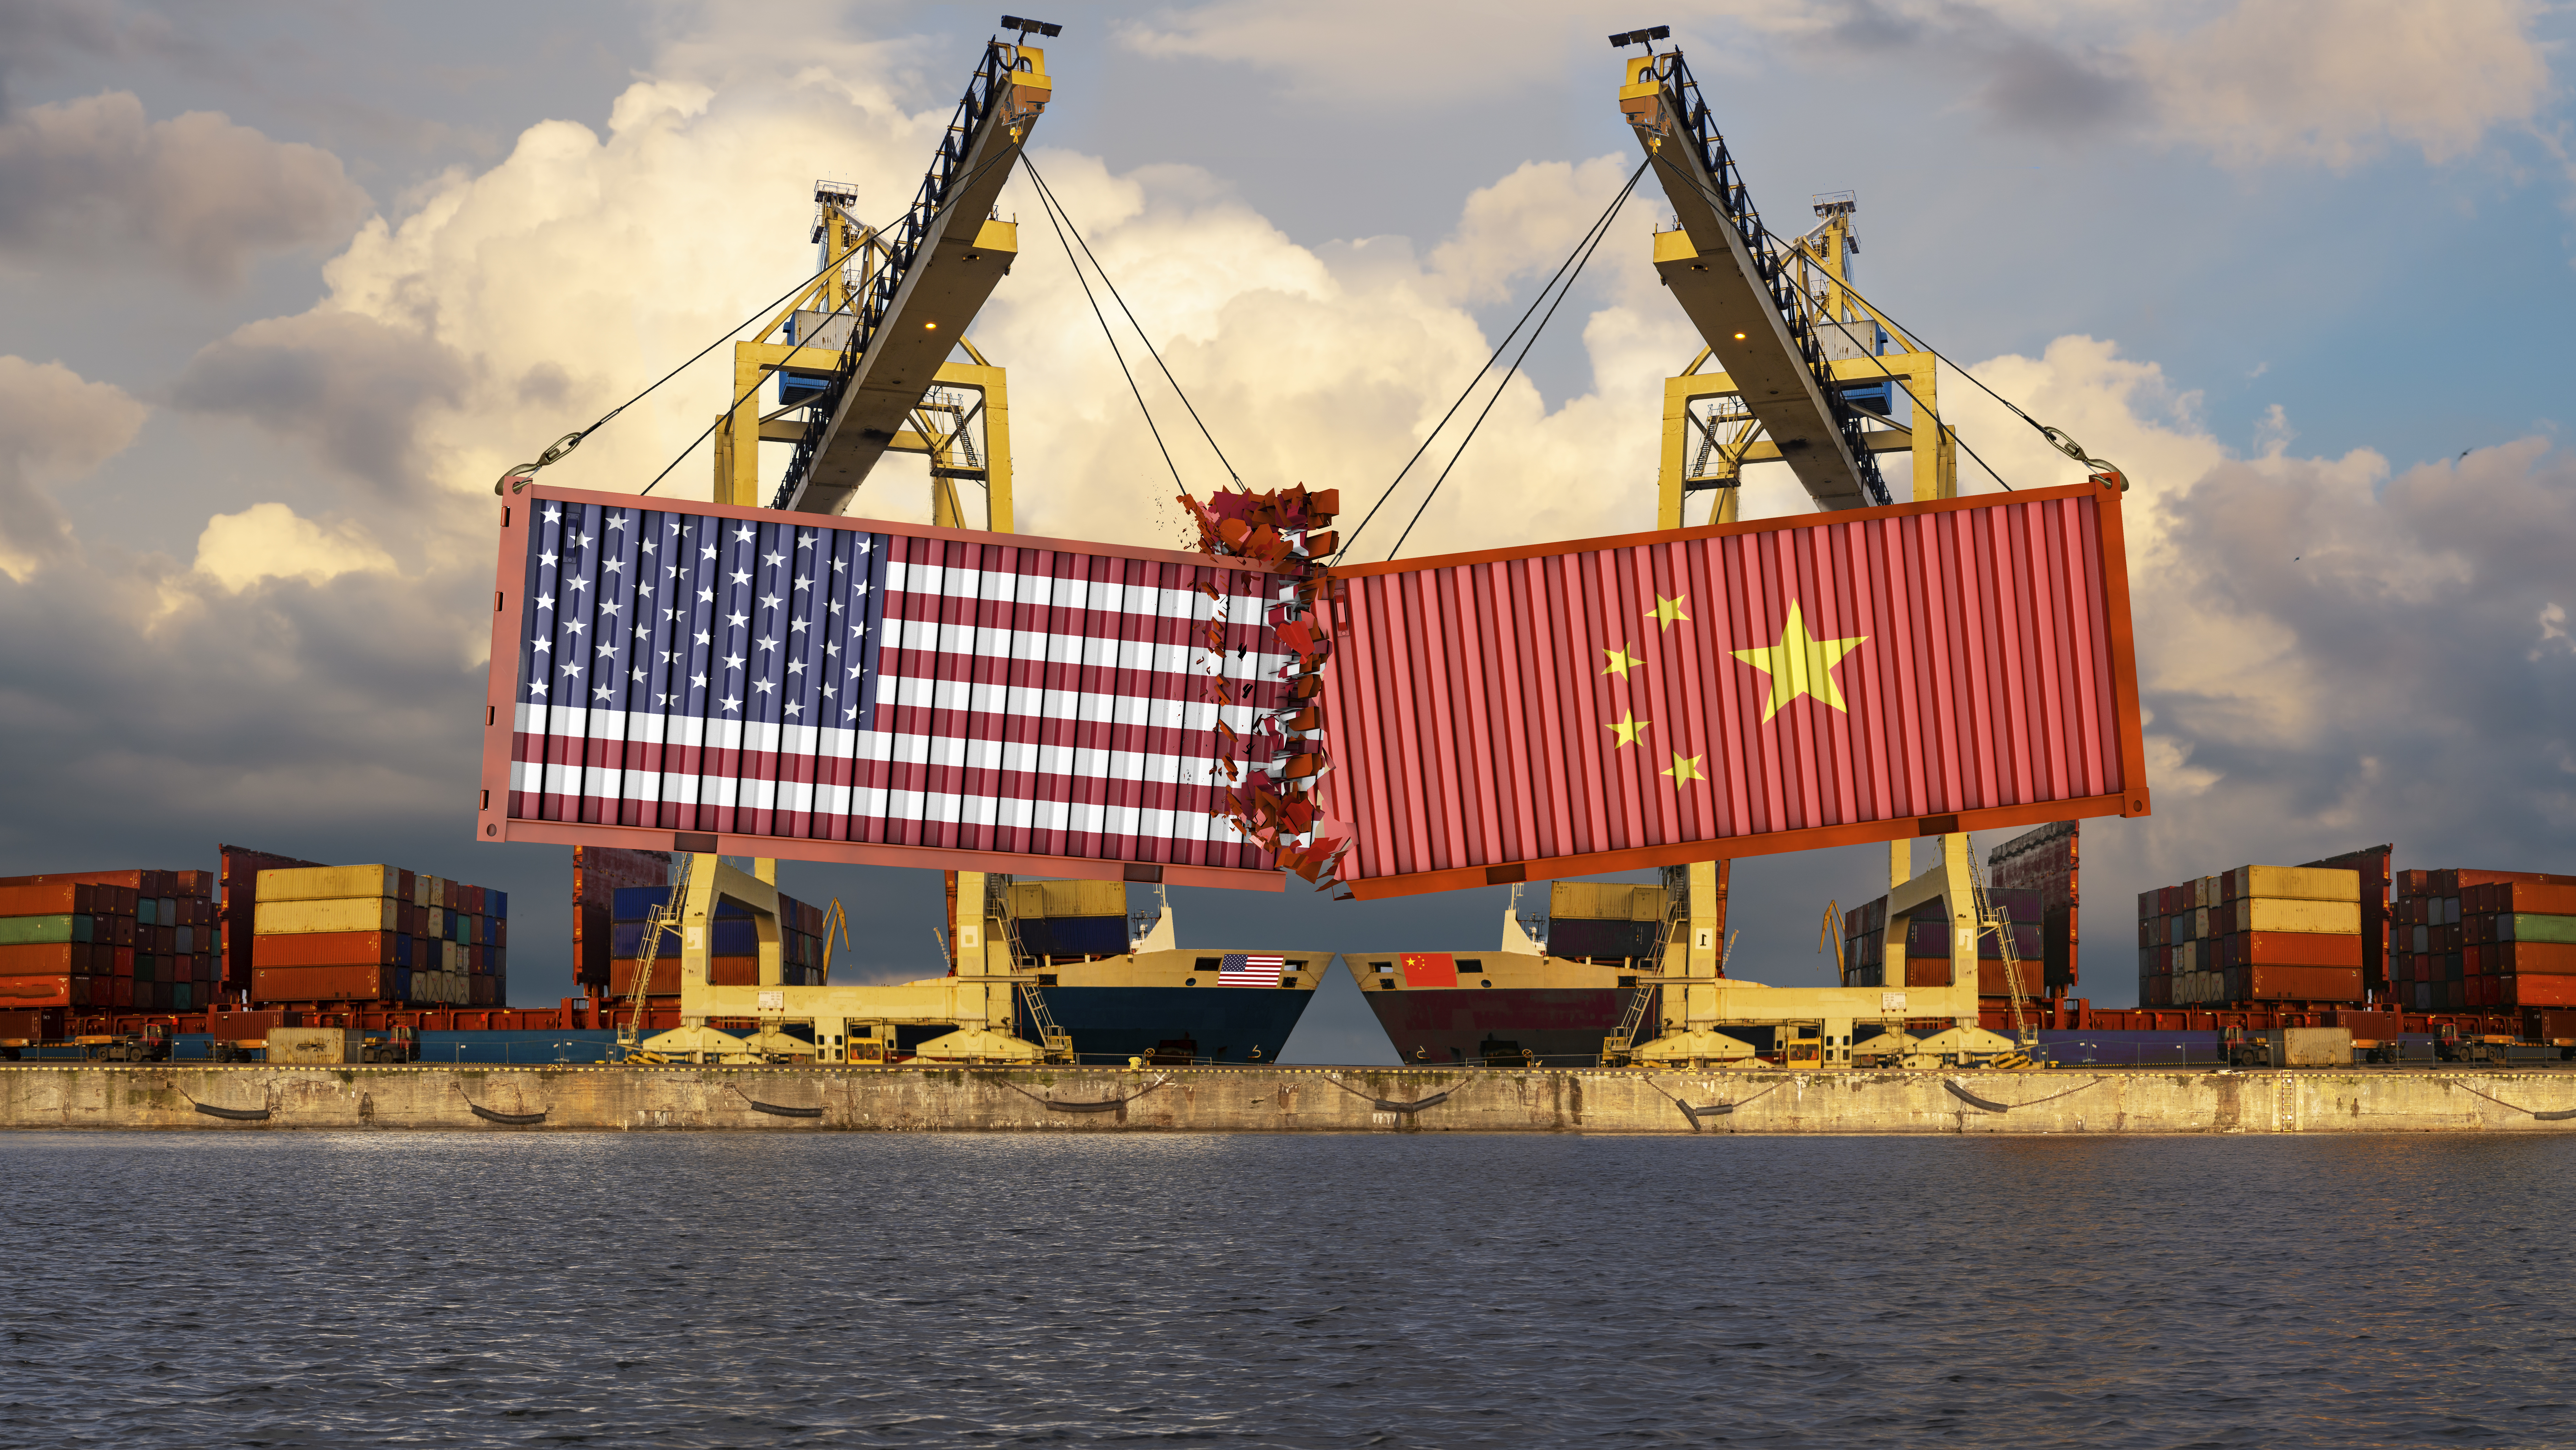 Two shipping containers with the US and Chinese flags on them crashing into one another